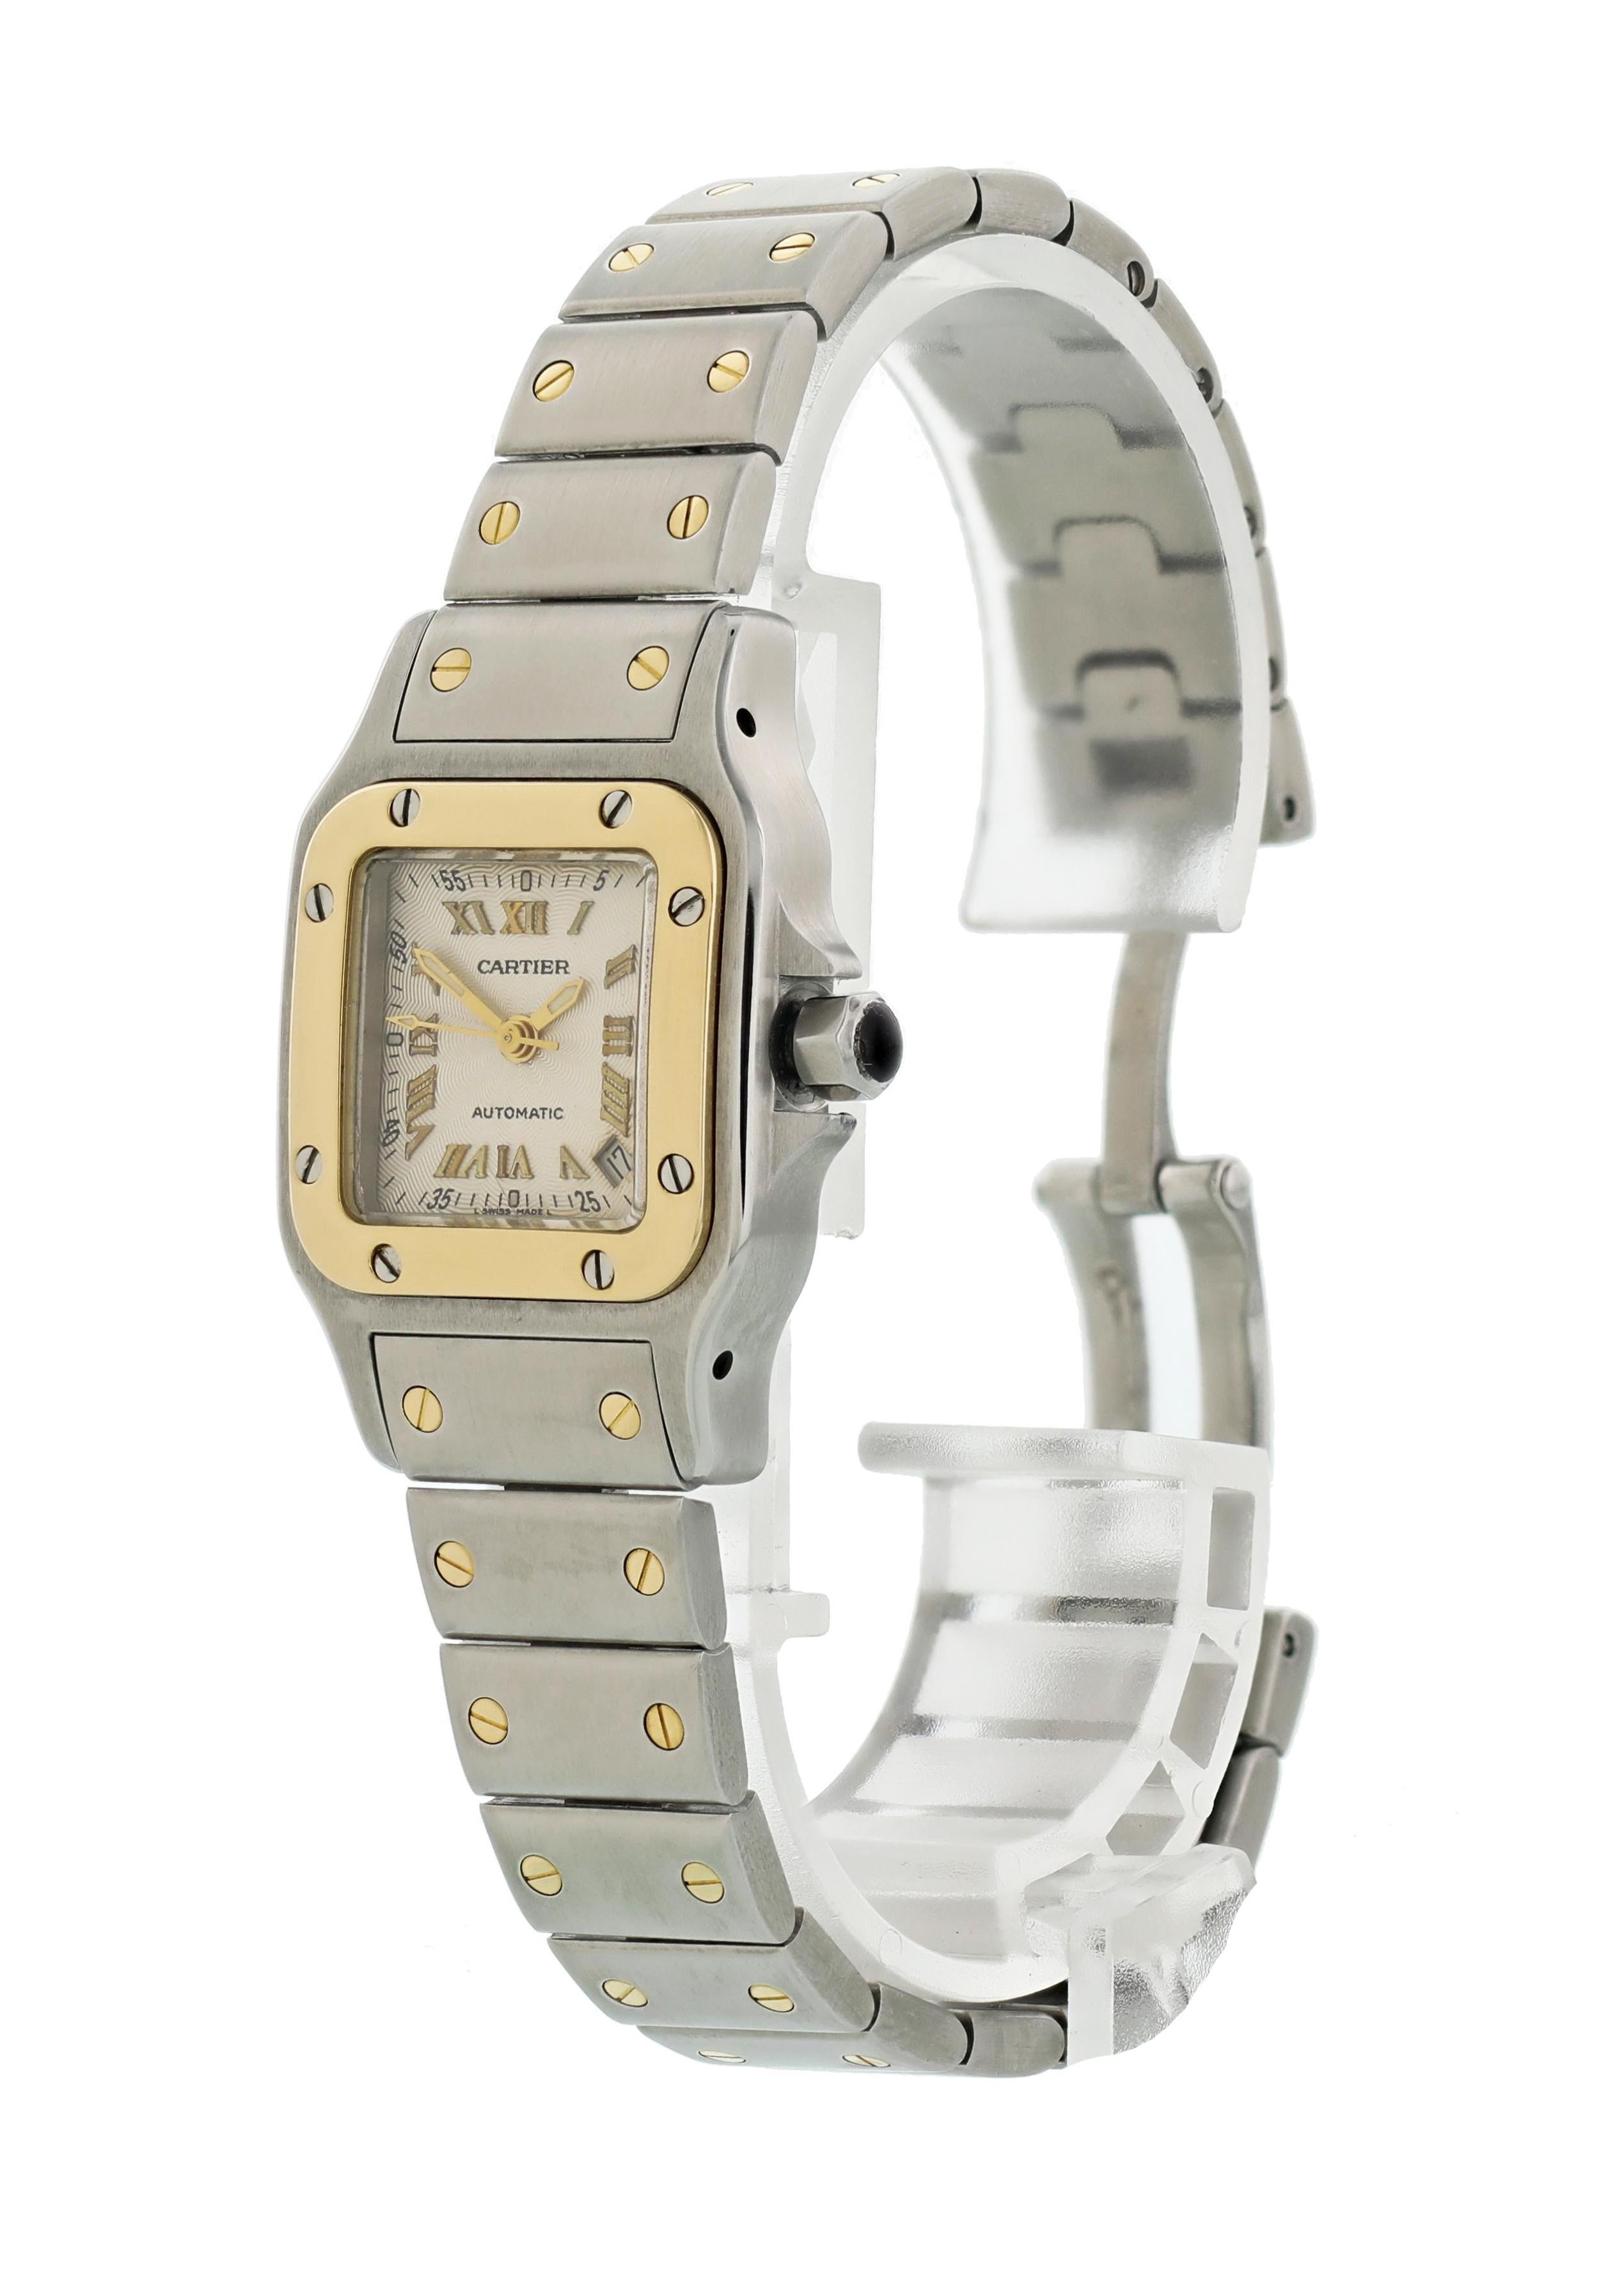 Cartier Santos Galbee 2423 Ladies Watch. 24 mm stainless steel case. 18K yellow gold bezel. Textured silver dial with gold luminous hands and gold Roman numeral hour markers. Date aperture at 4:30. Stainless steel and 18K yellow gold band with a